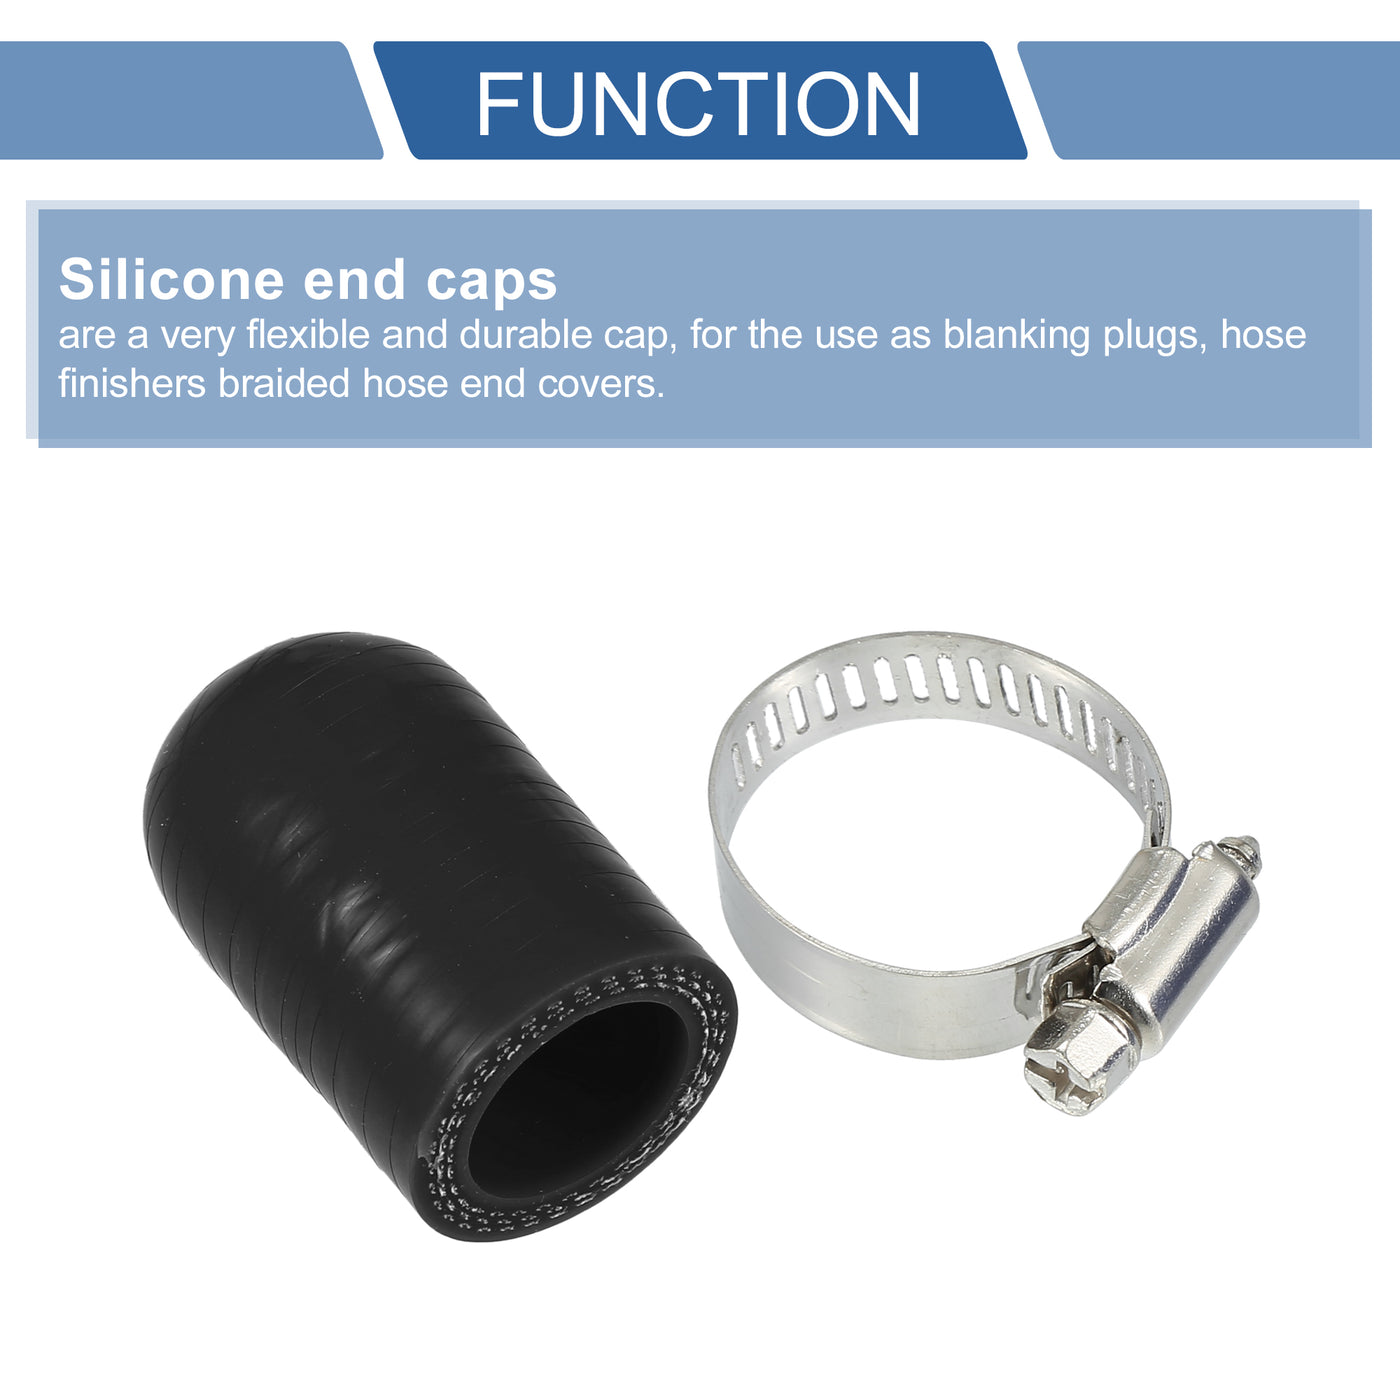 X AUTOHAUX 1 Set 30mm Length 20mm/0.79" ID Black Car Silicone Rubber Hose End Cap with Clamps Silicone Reinforced Blanking Cap for Bypass Tube Universal